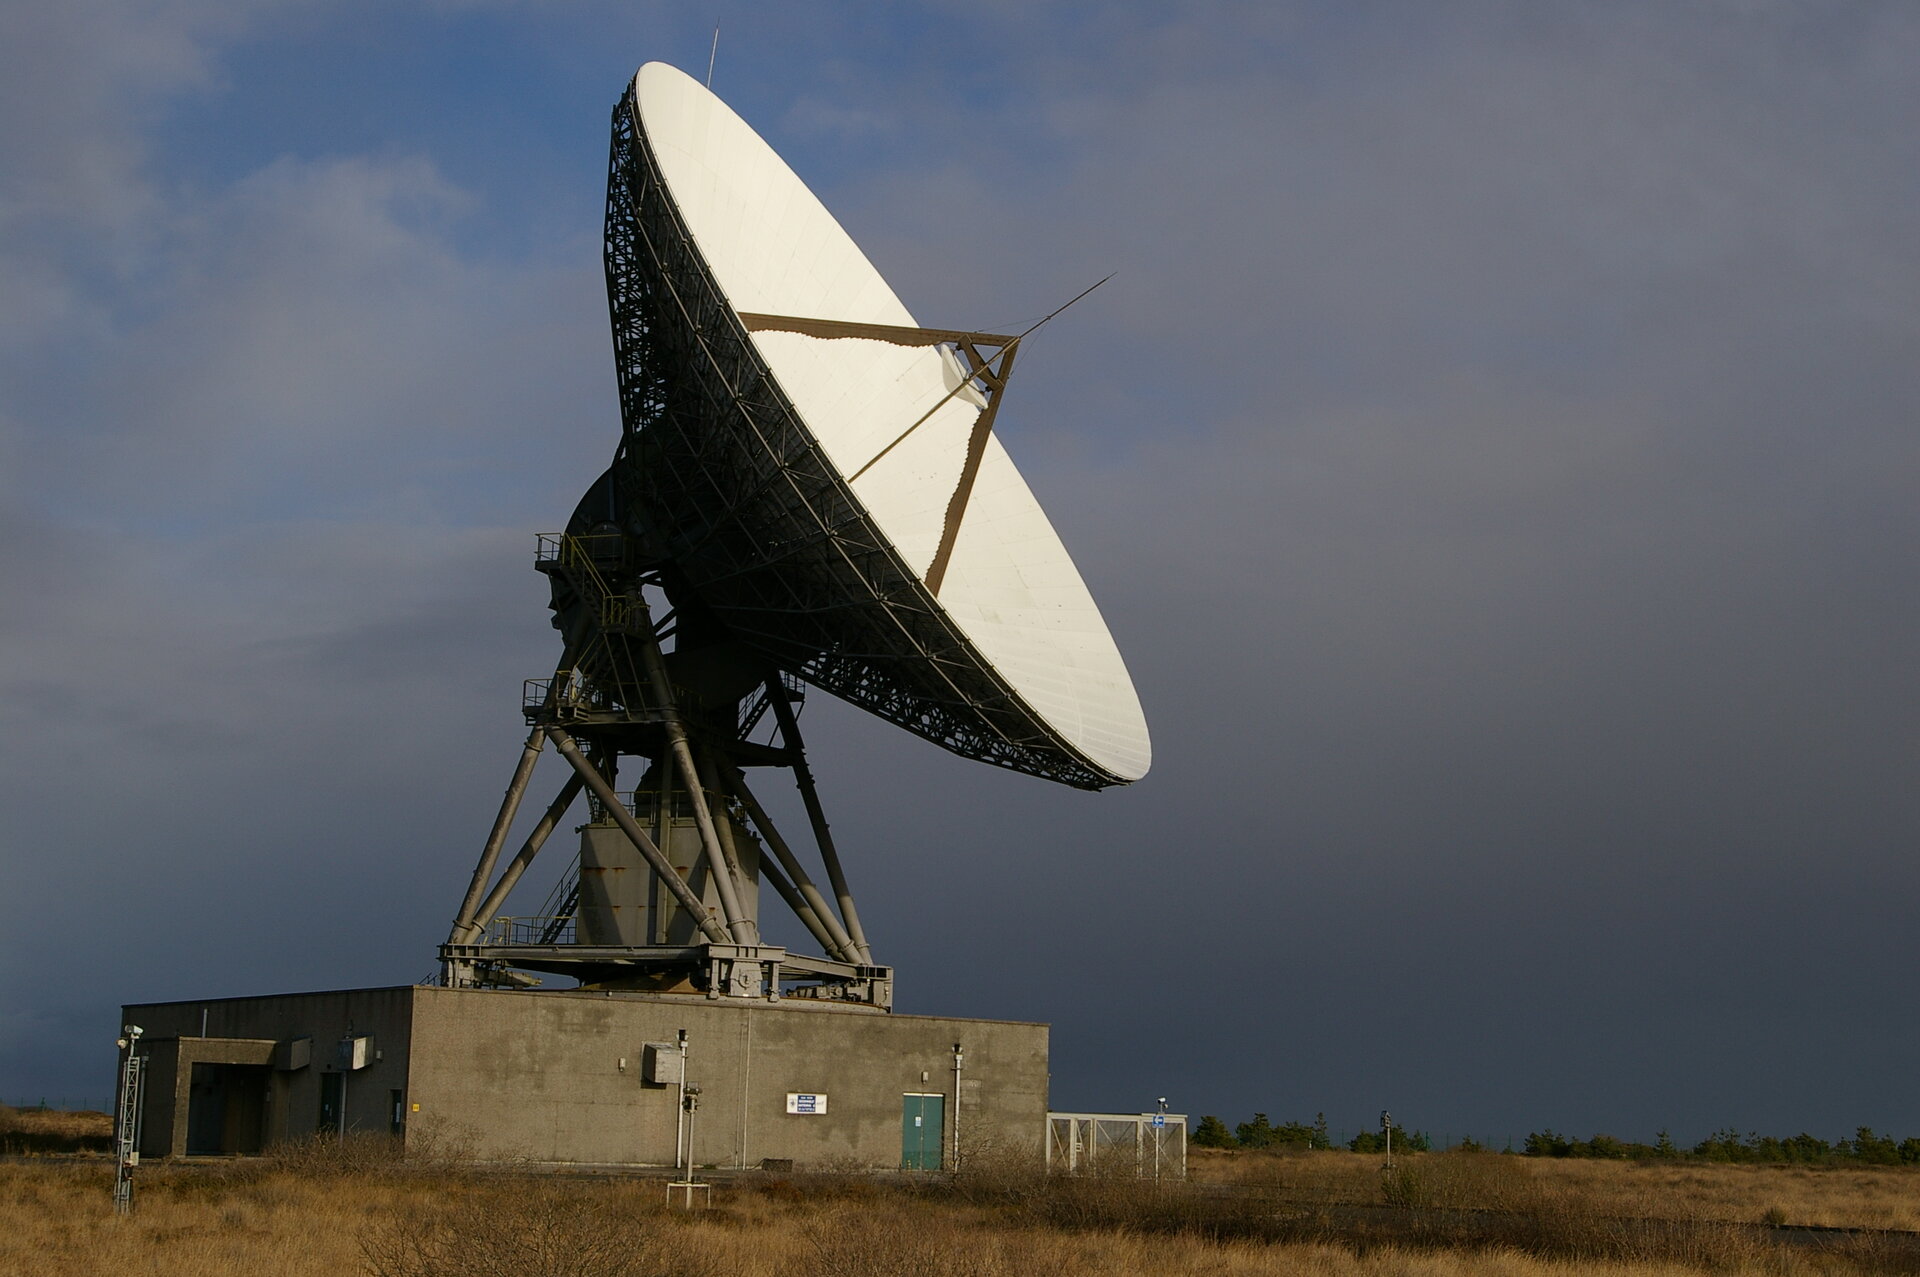 Goonhilly antenna